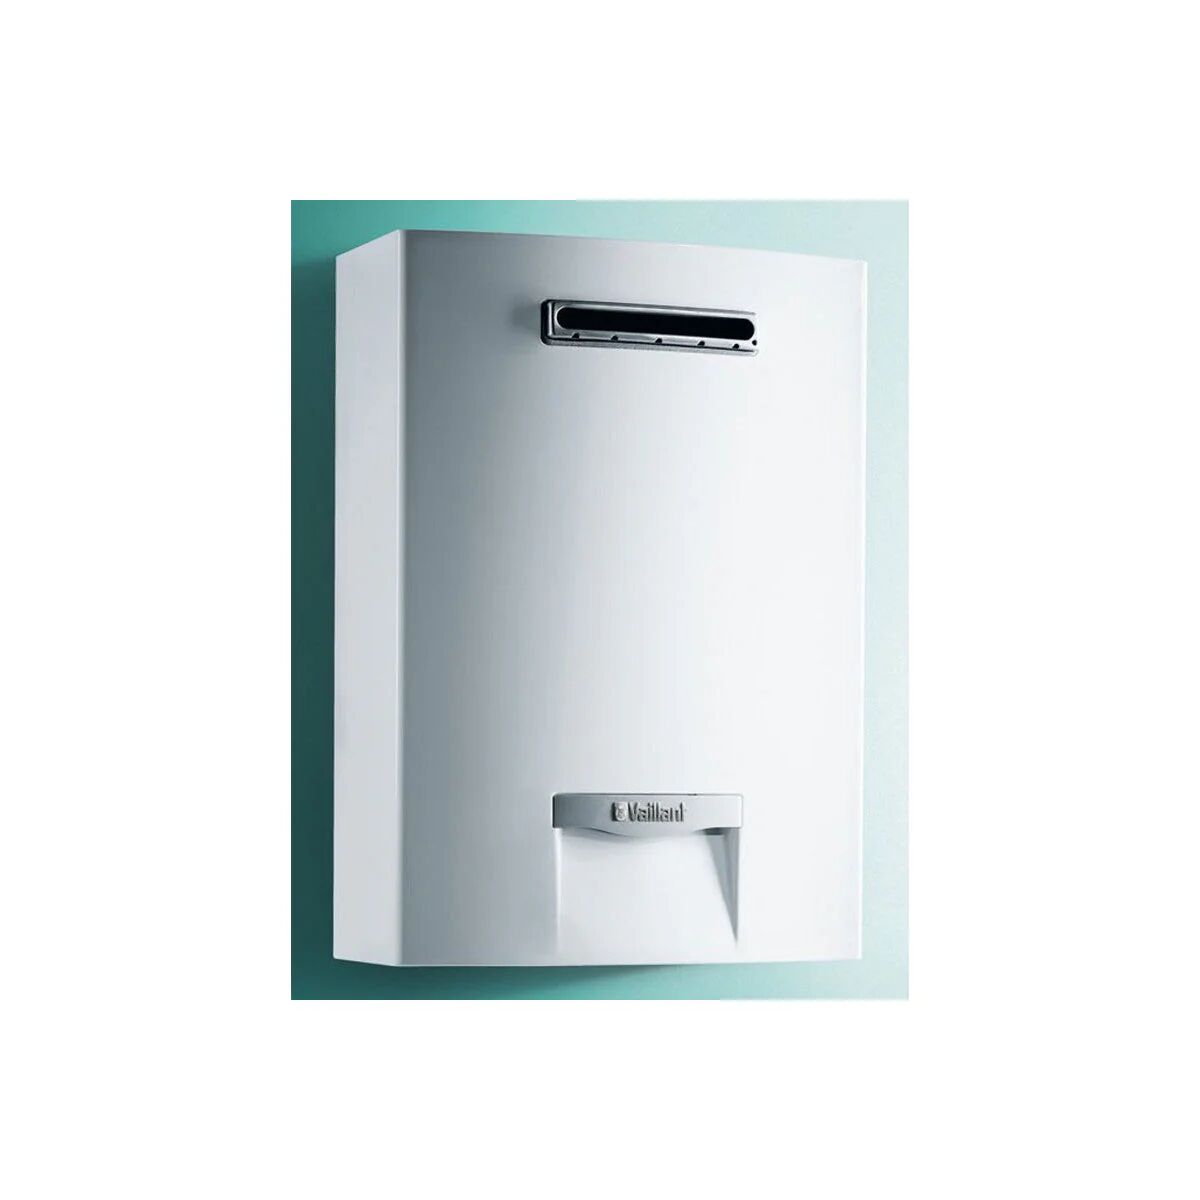 Scaldabagno Vaillant Outsidemag 128/1-5 Camera Stagna 12 Lt Low Nox Metano A